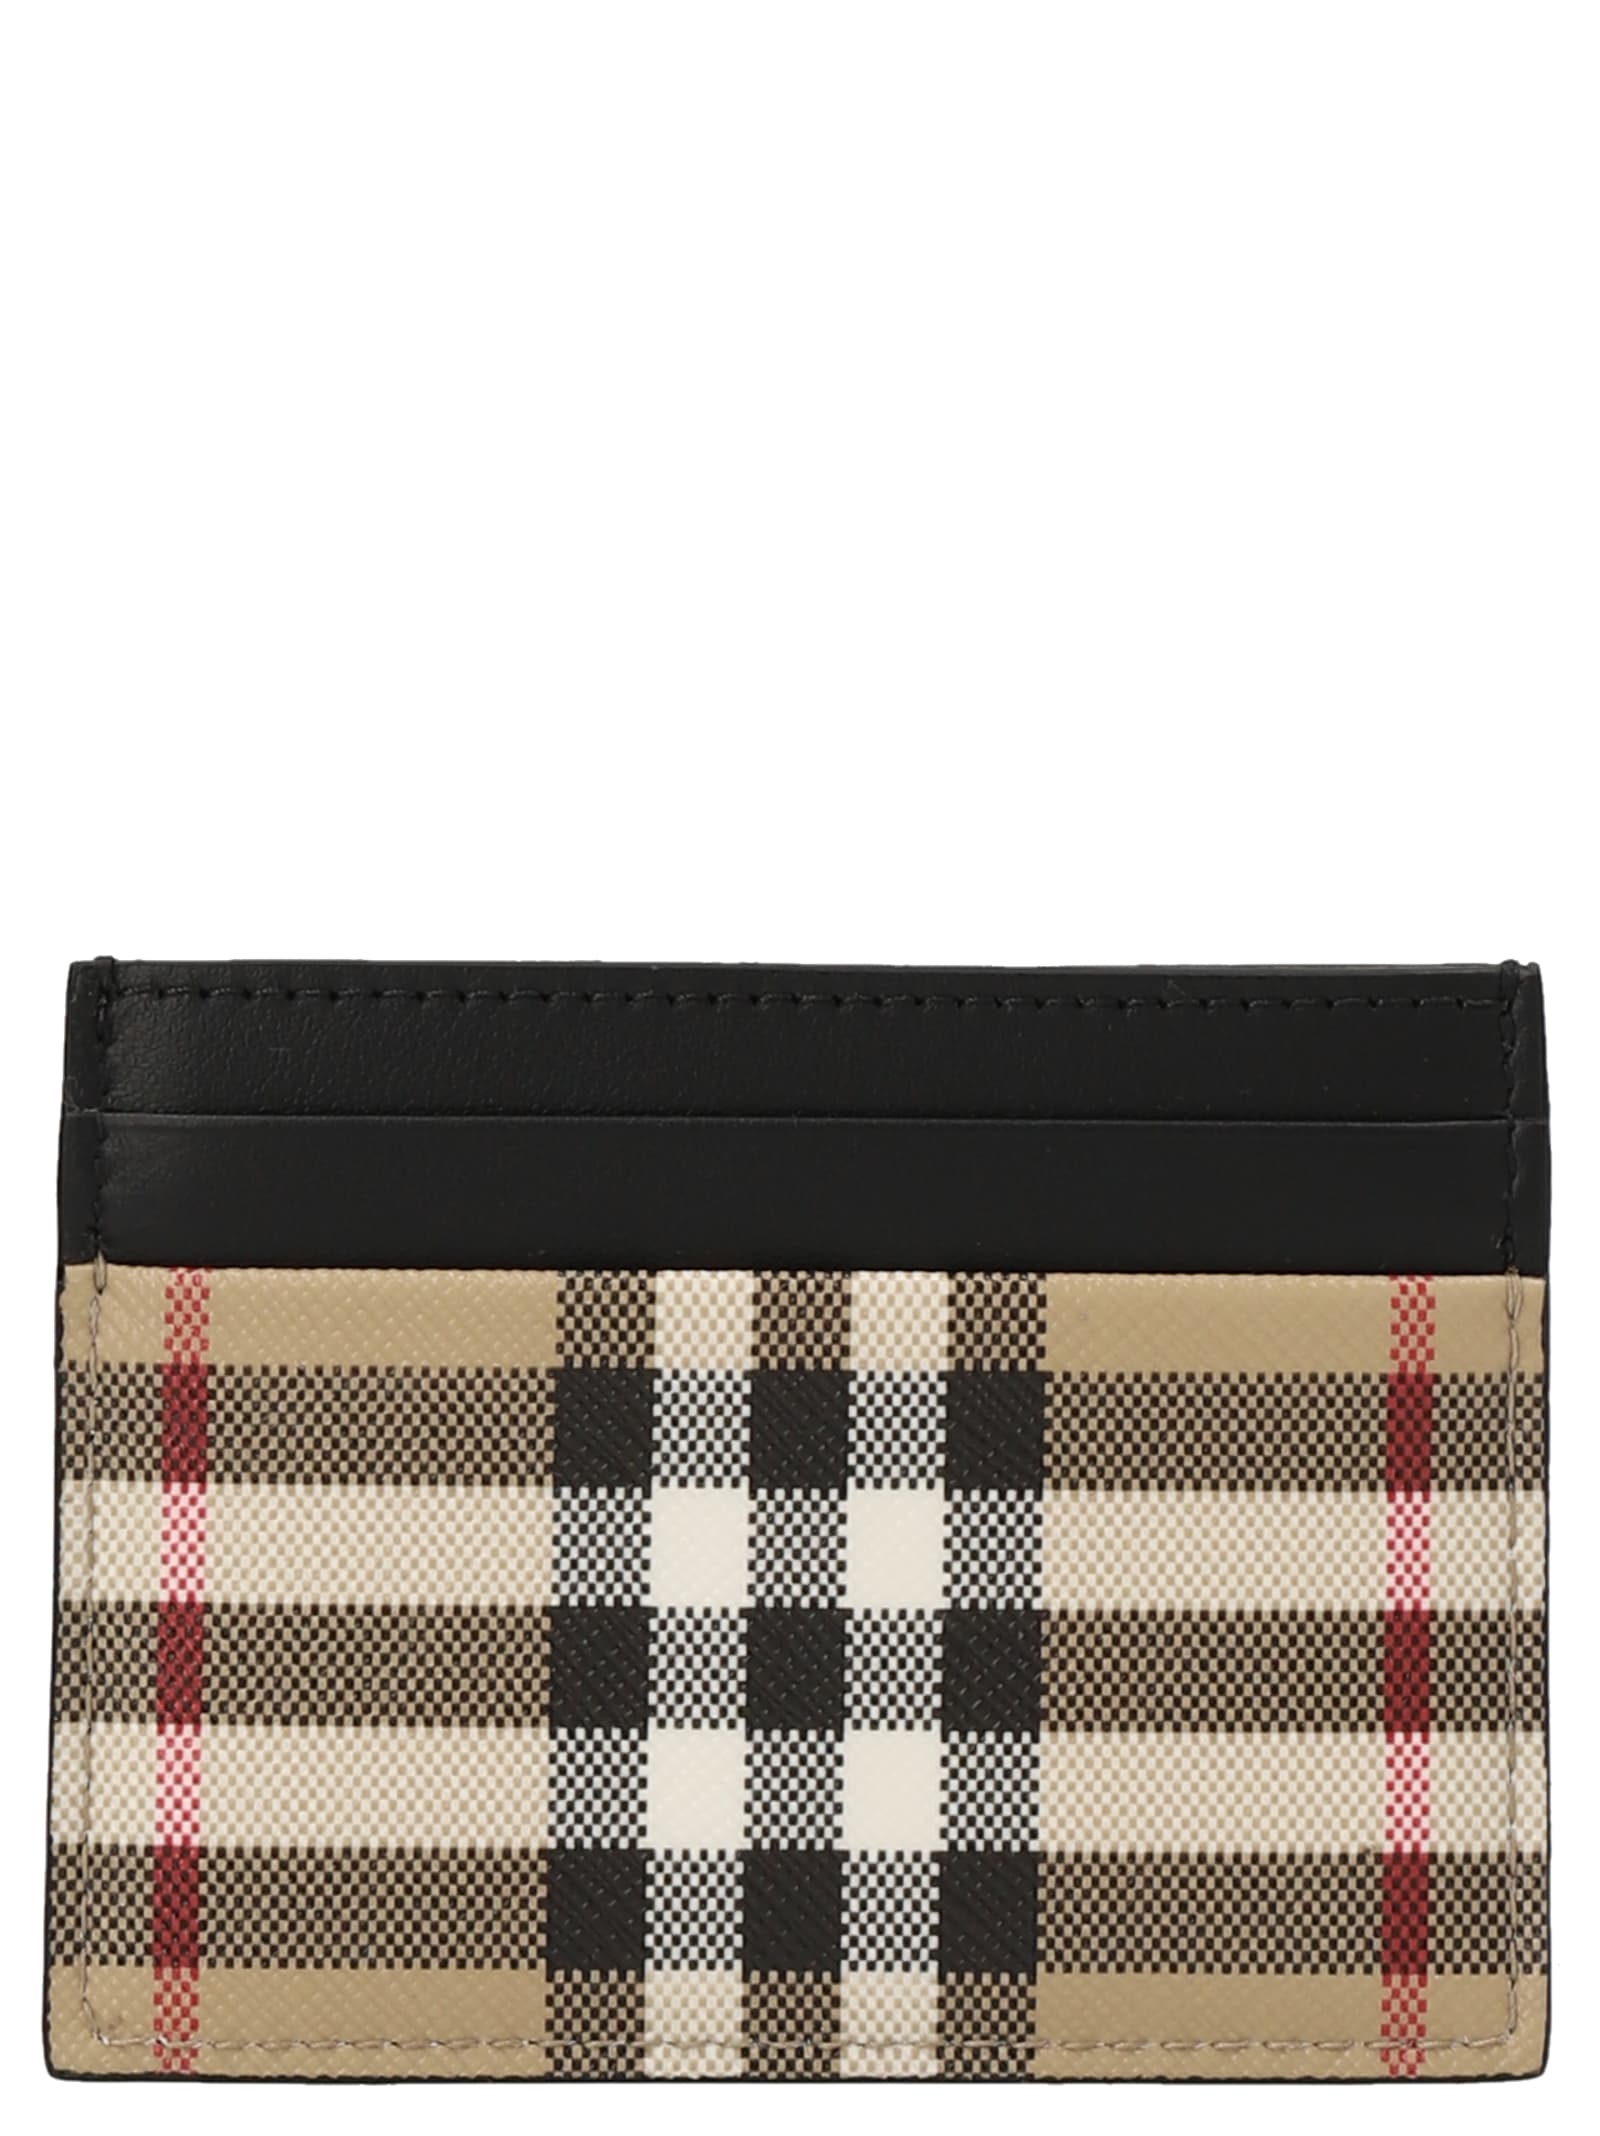 Burberry Check Print Card Holder Wallet